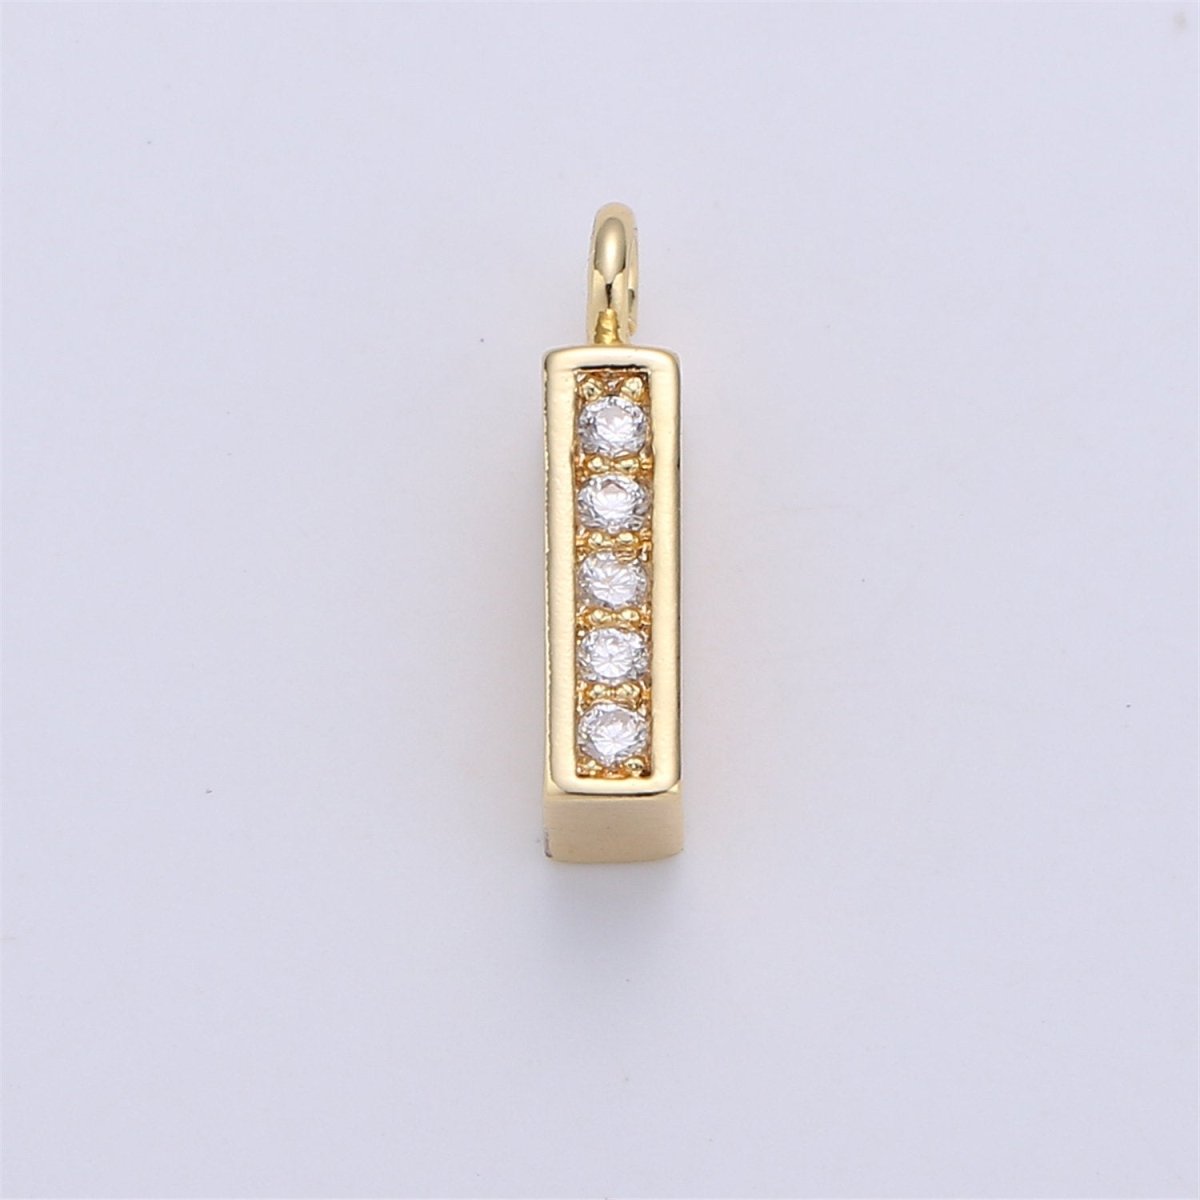 Minimal Stick Cubic Charm, Lead Free Nickel free 12mmx15mm 14K gold Filled Charm, Cubic Zirconia Charm for Necklace Earring Charm C-701 - DLUXCA